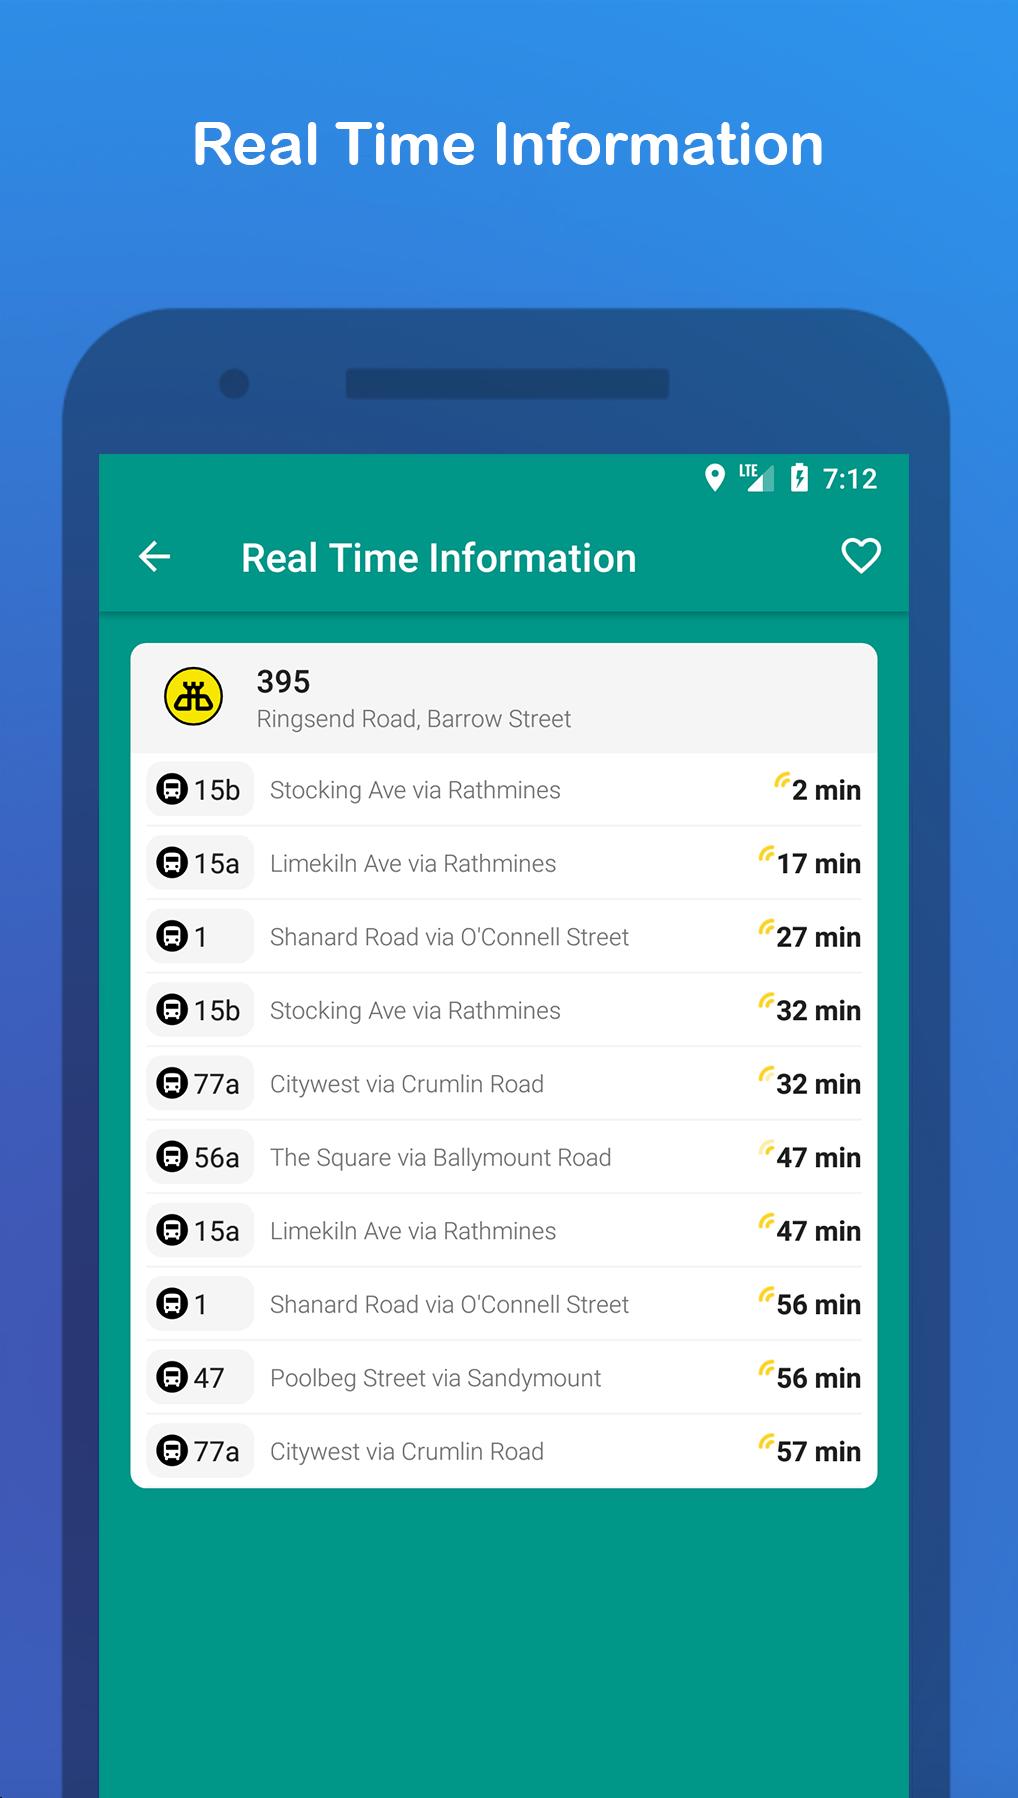 Dublin Bus: Real Time Information